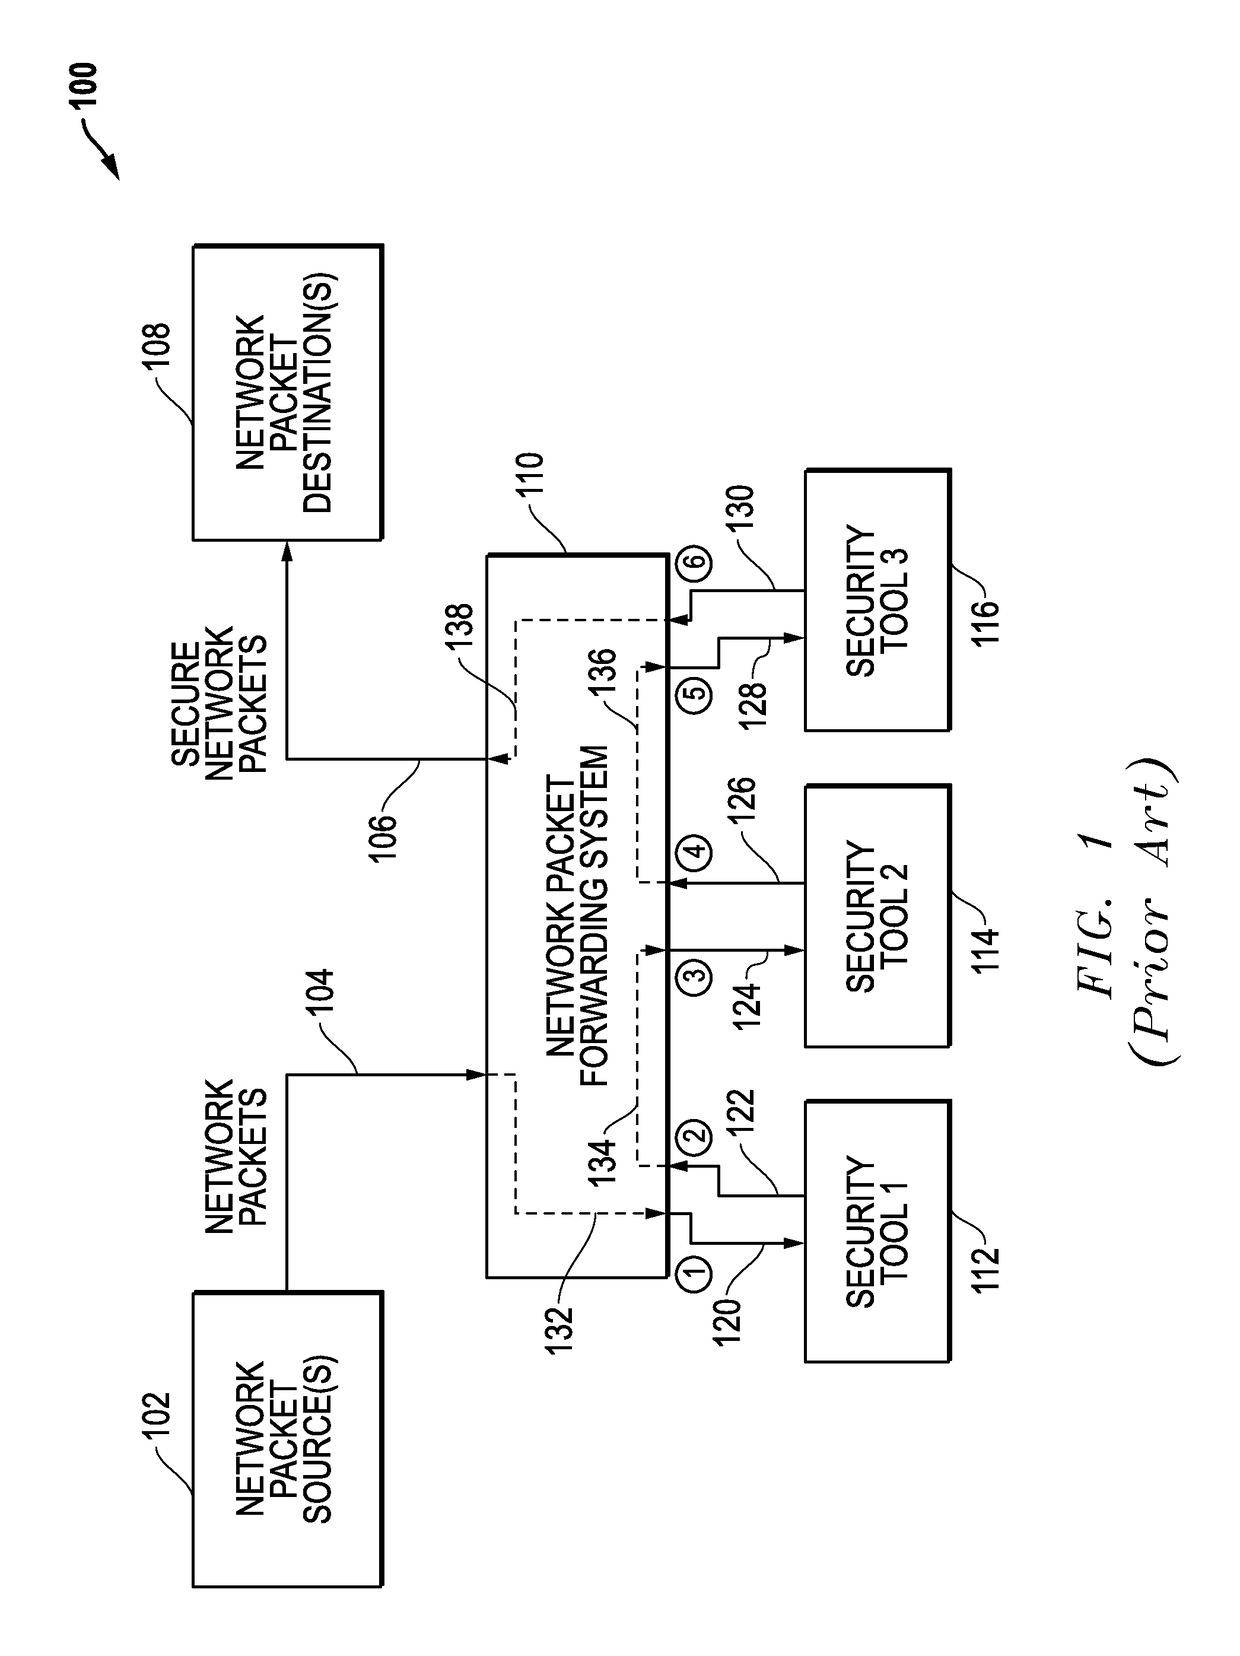 Latency-based timeouts for concurrent security processing of network packets by multiple in-line network security tools